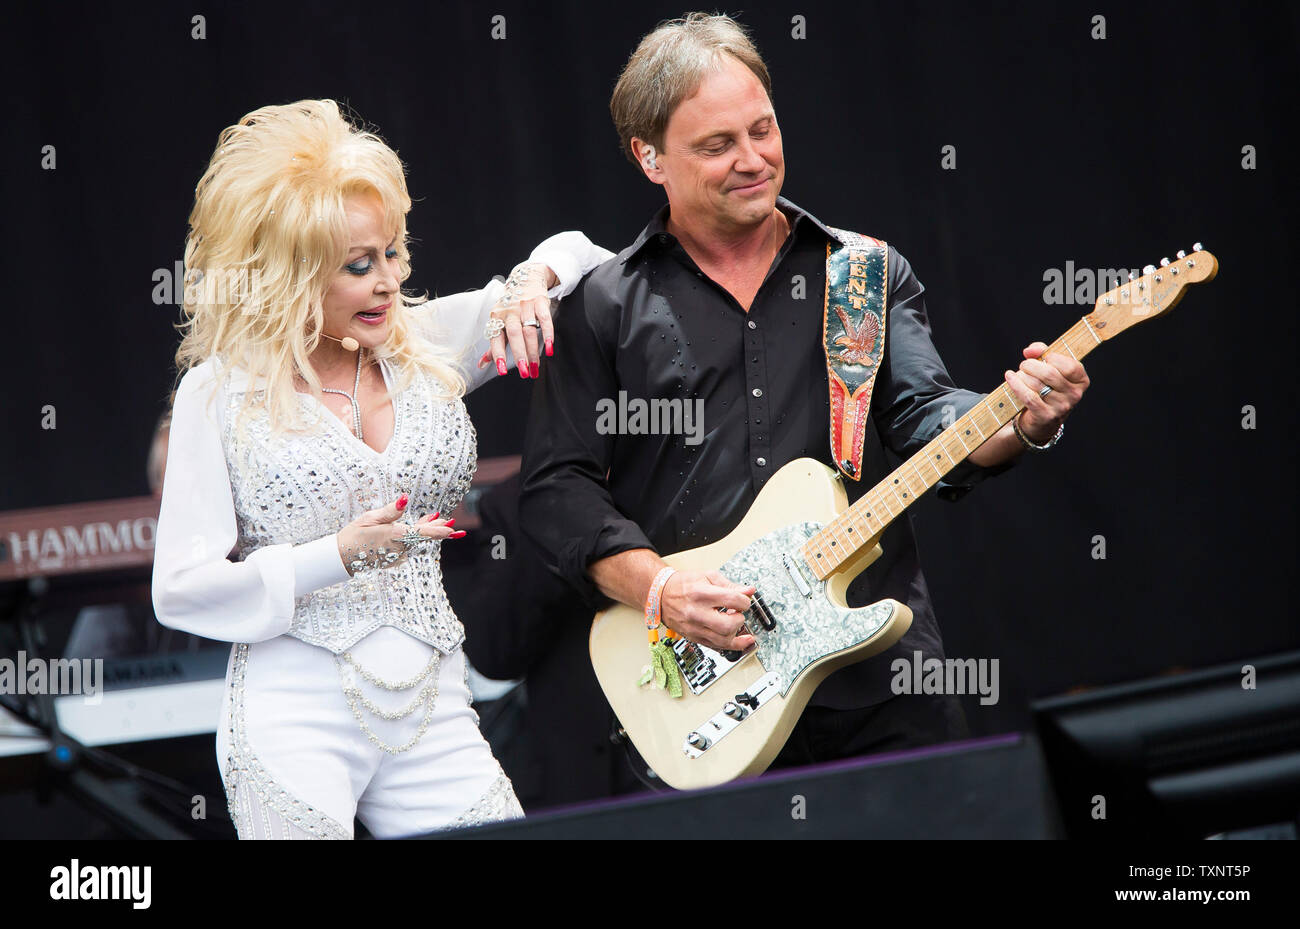 American country star Dolly Parton performing with her band leader Kent Wells on the main Pyramid Stage of Glastonbury Festival in 2014. Glastonbury Festival of Contemporary Performing Arts is the largest music festival in UK, attracting over 135,000 people each to Pilton, Somerset. Stock Photo